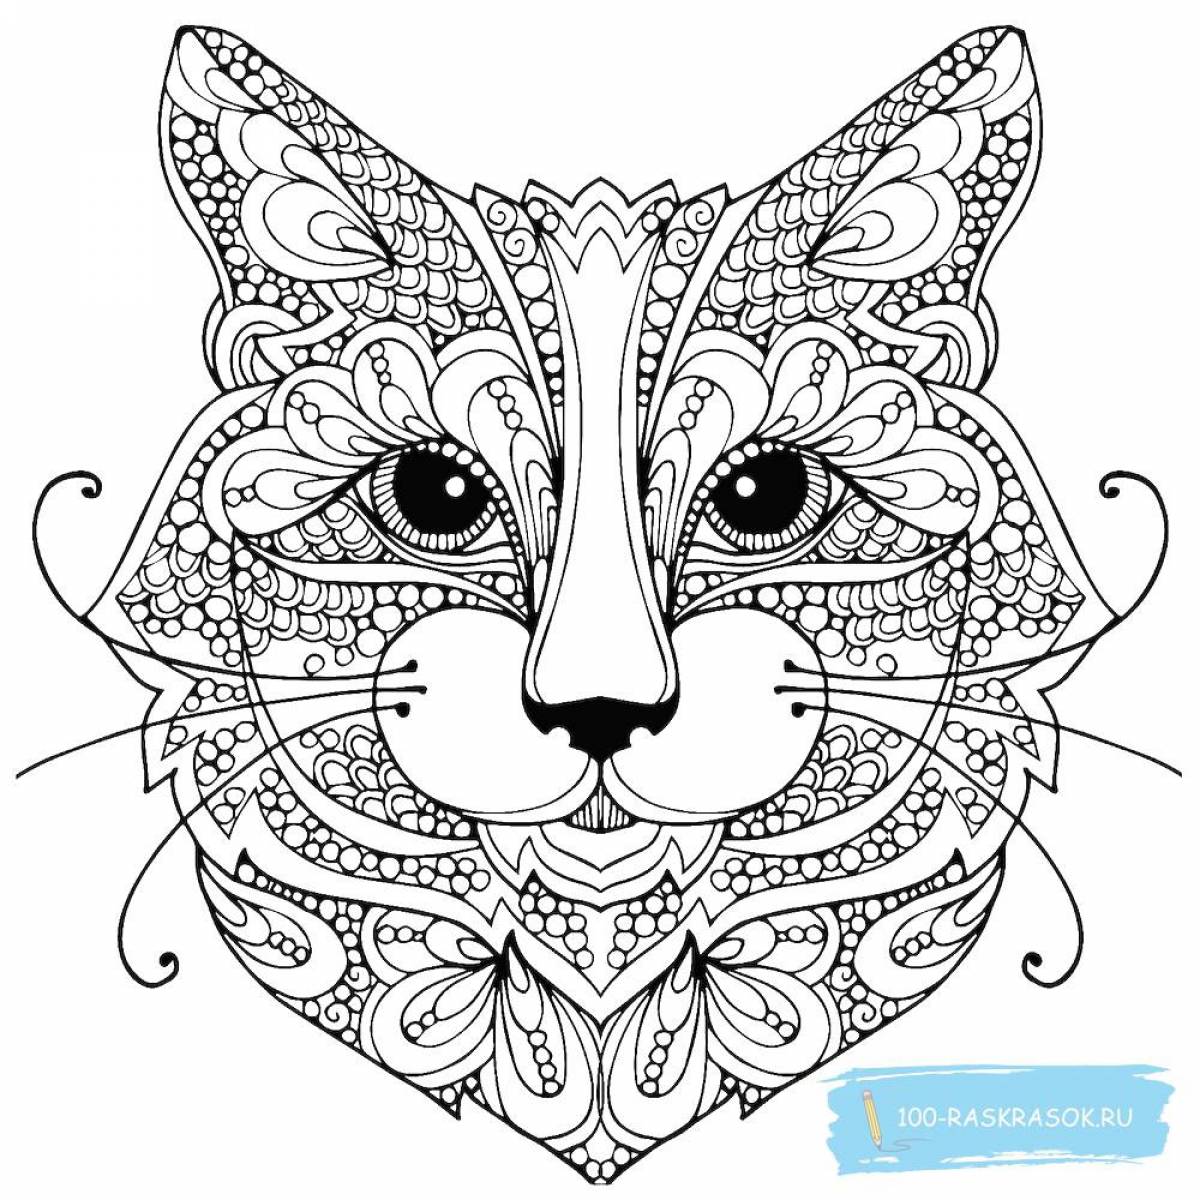 Great anti-stress coloring book for adults